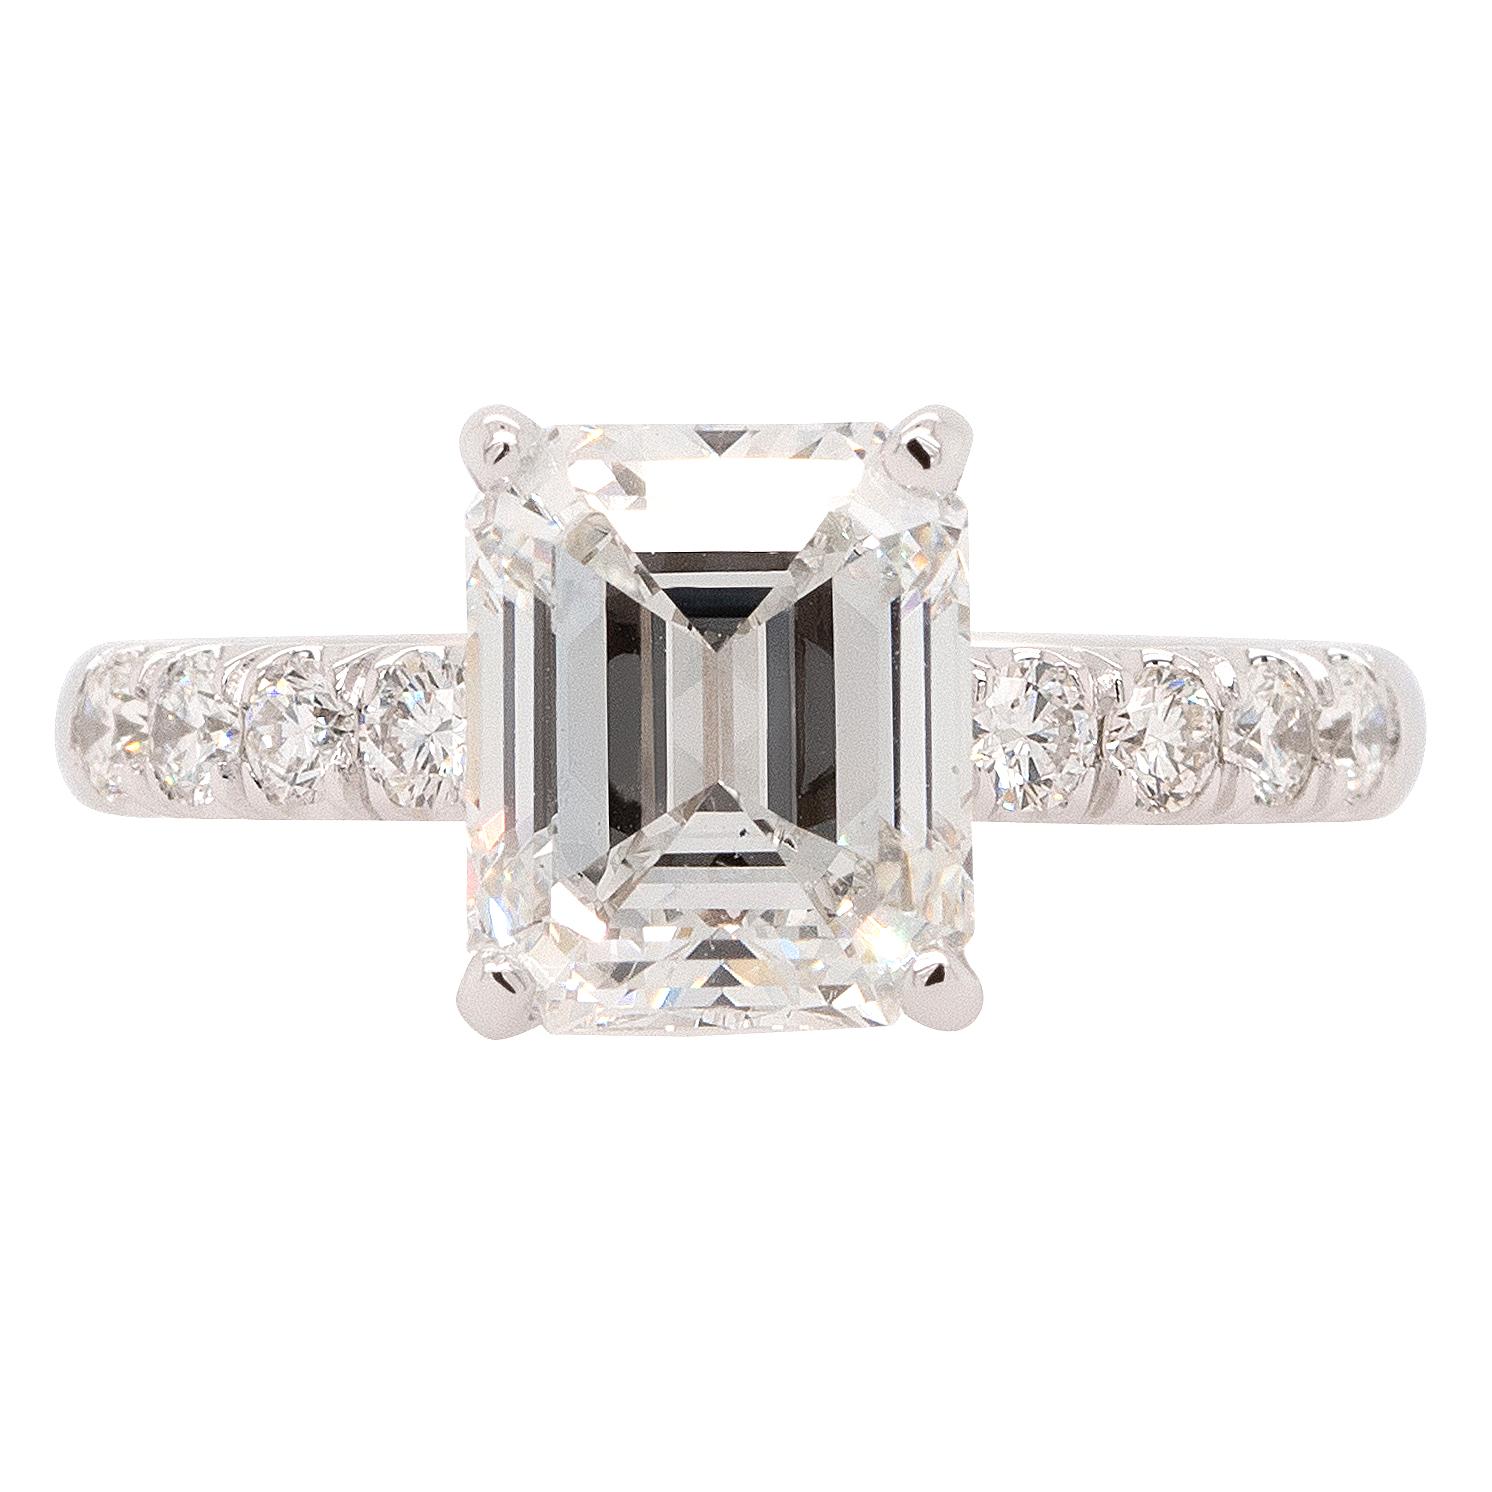 This captivating ring features a stunning 3.03ct emerald-cut GIA diamond in a 14k white gold setting. The diamond, with its impressive F color and VVS2 clarity, radiates brilliance and beauty. Complemented by a cluster of round cut natural diamonds